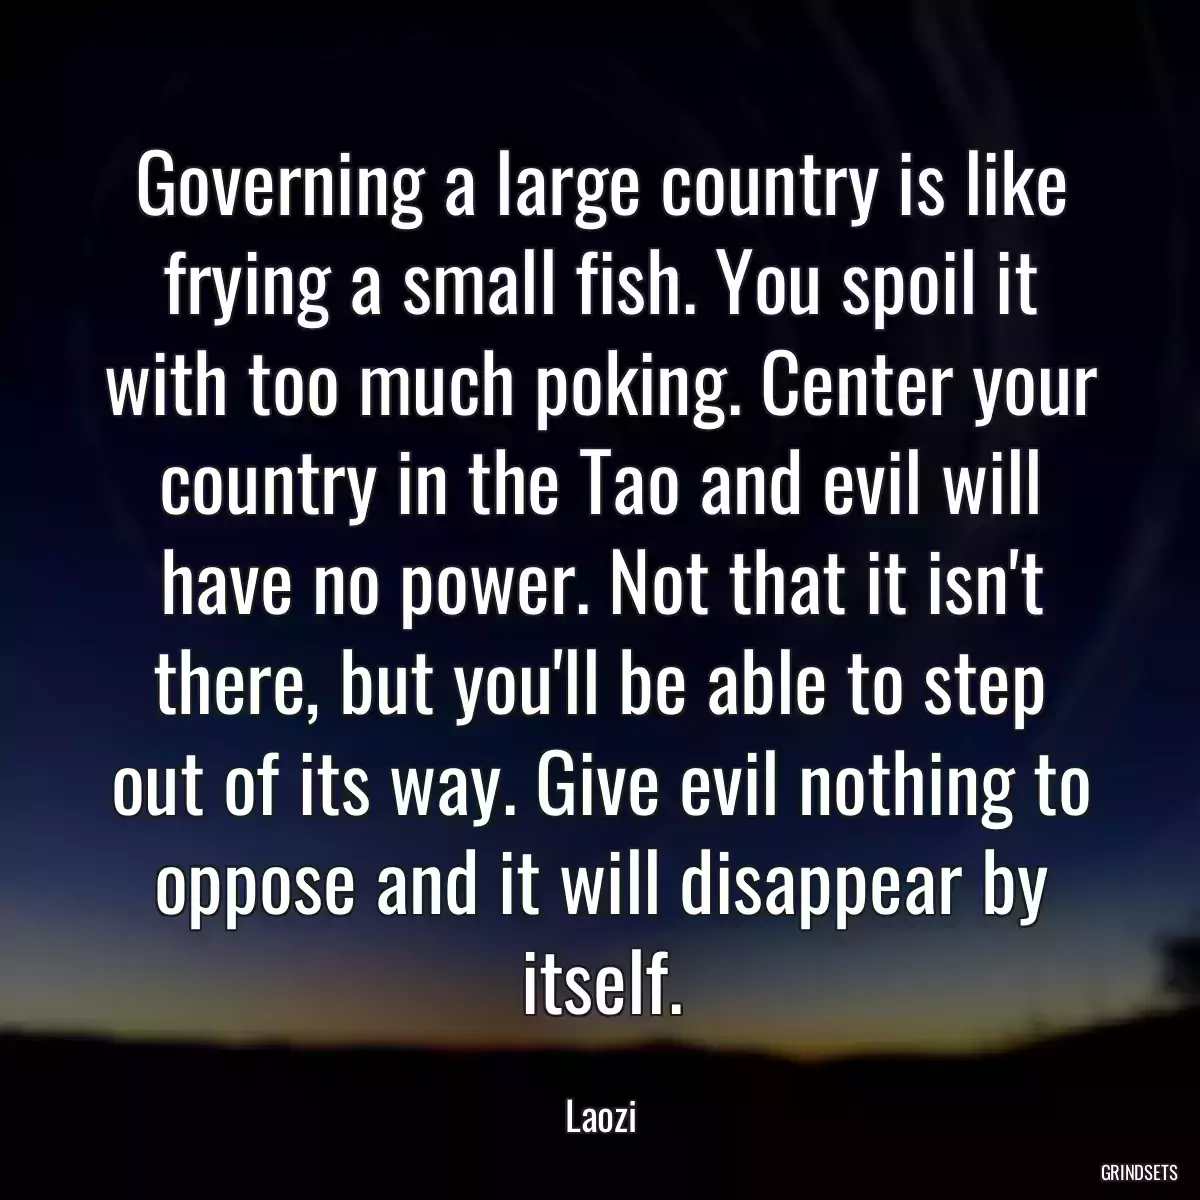 Governing a large country is like frying a small fish. You spoil it with too much poking. Center your country in the Tao and evil will have no power. Not that it isn\'t there, but you\'ll be able to step out of its way. Give evil nothing to oppose and it will disappear by itself.